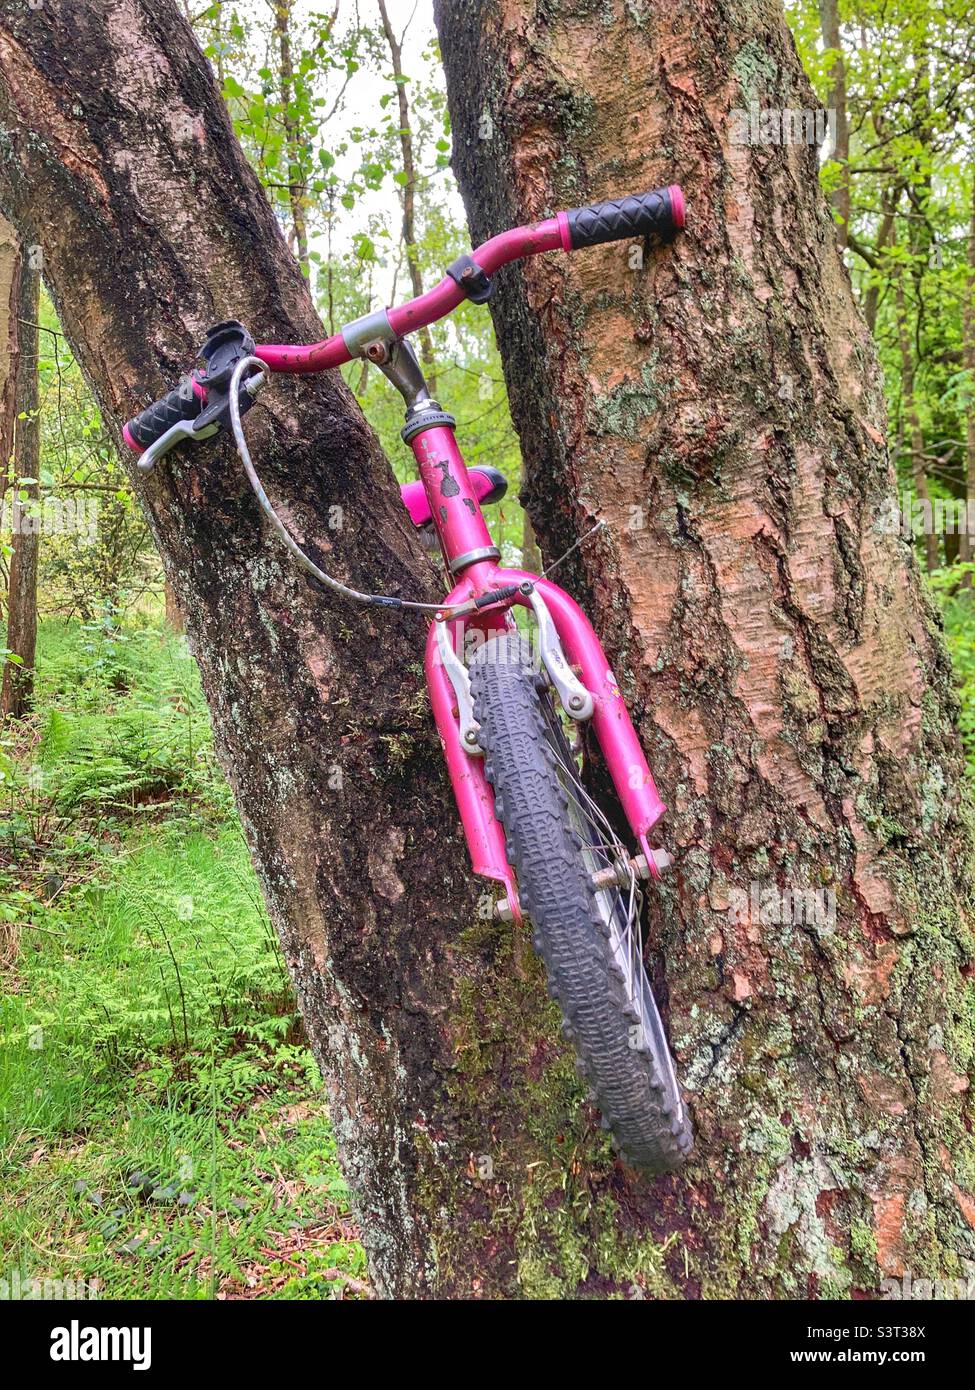 Child’s bicycle stuck in a tree Stock Photo